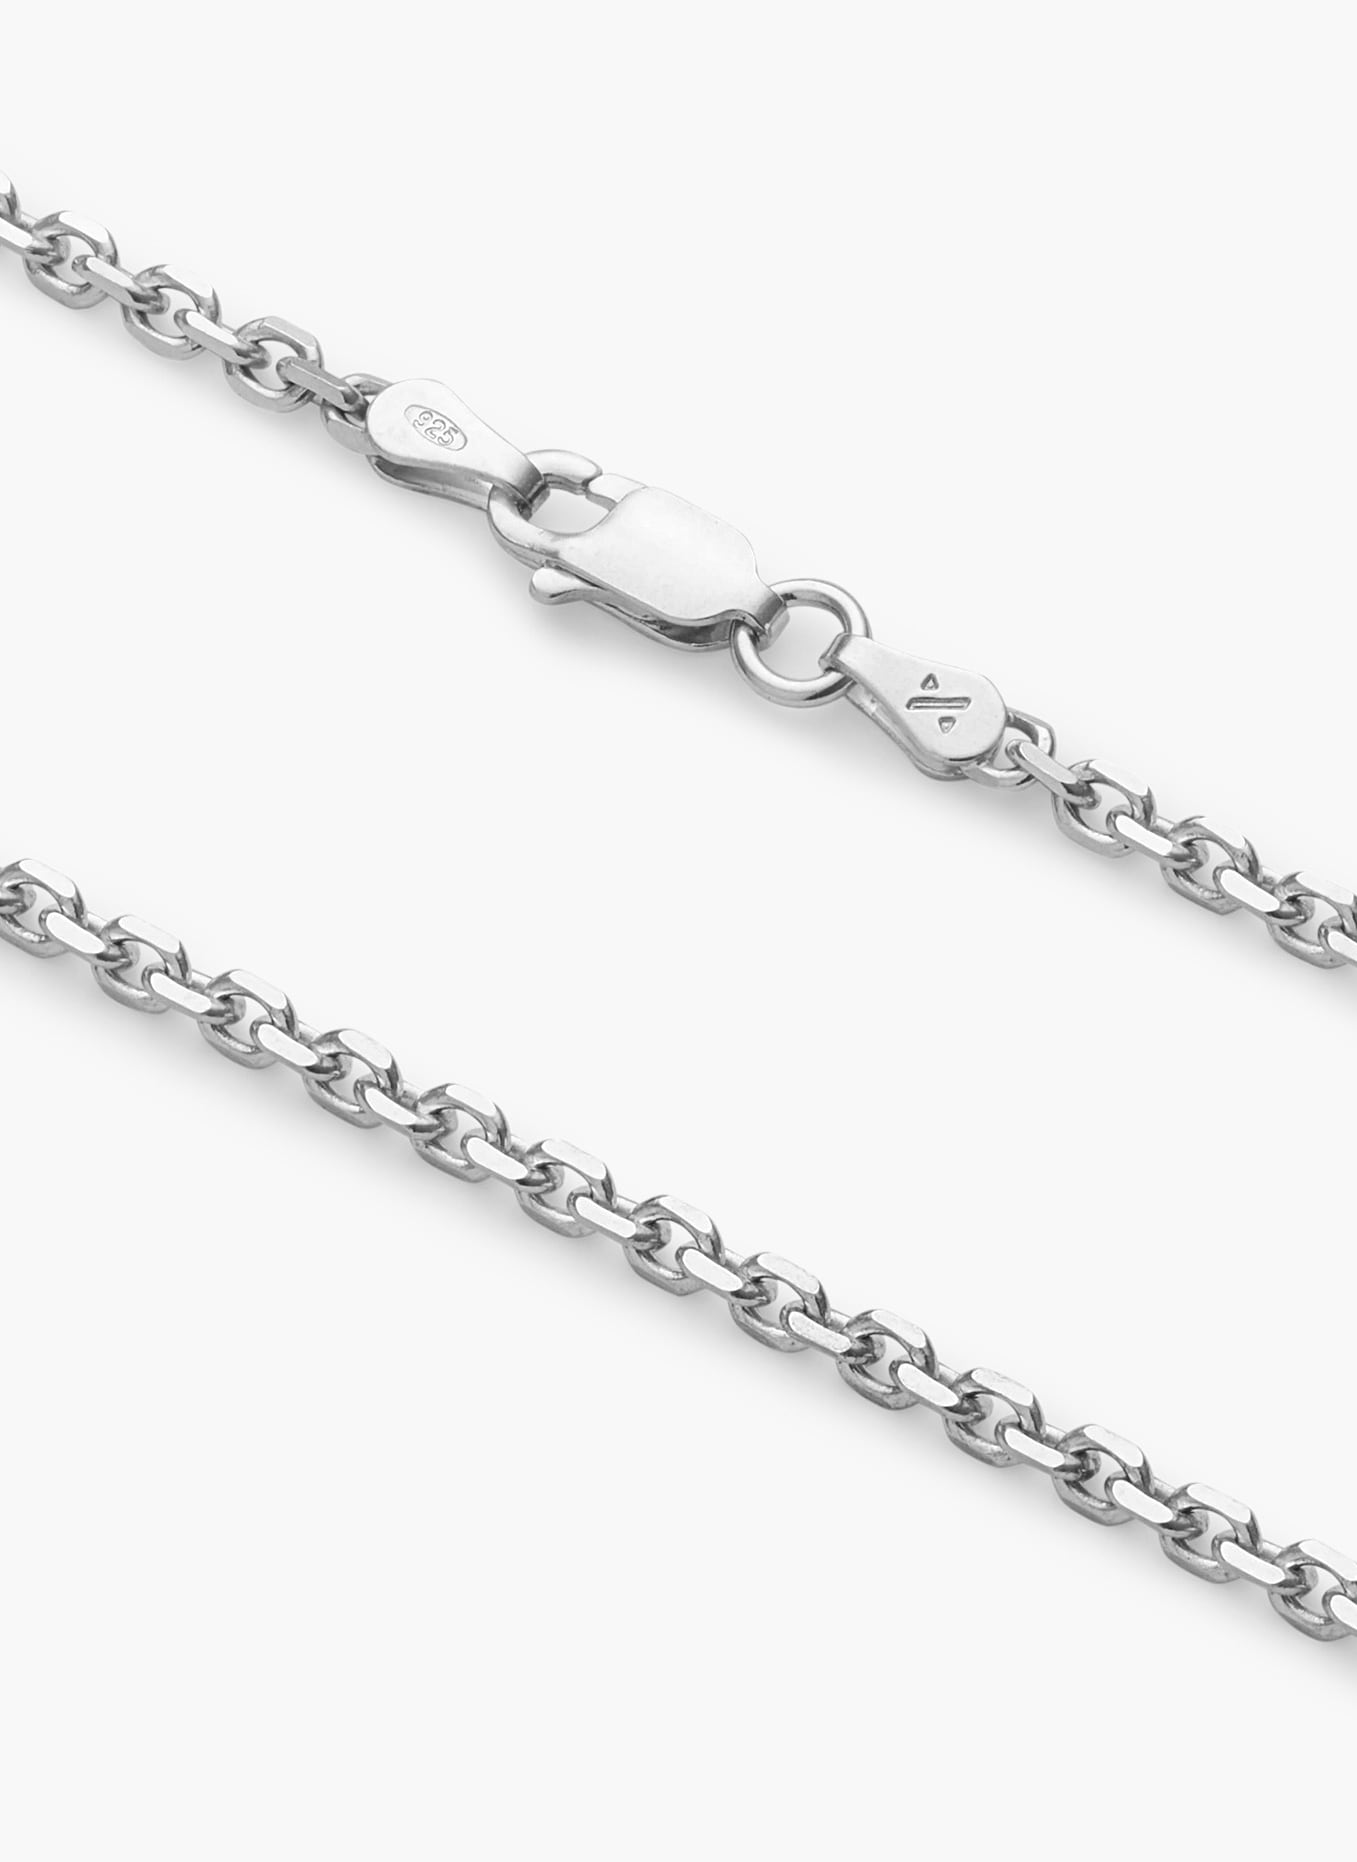 Image Cable Chain - 2mm Silver - Higher Quality Standards